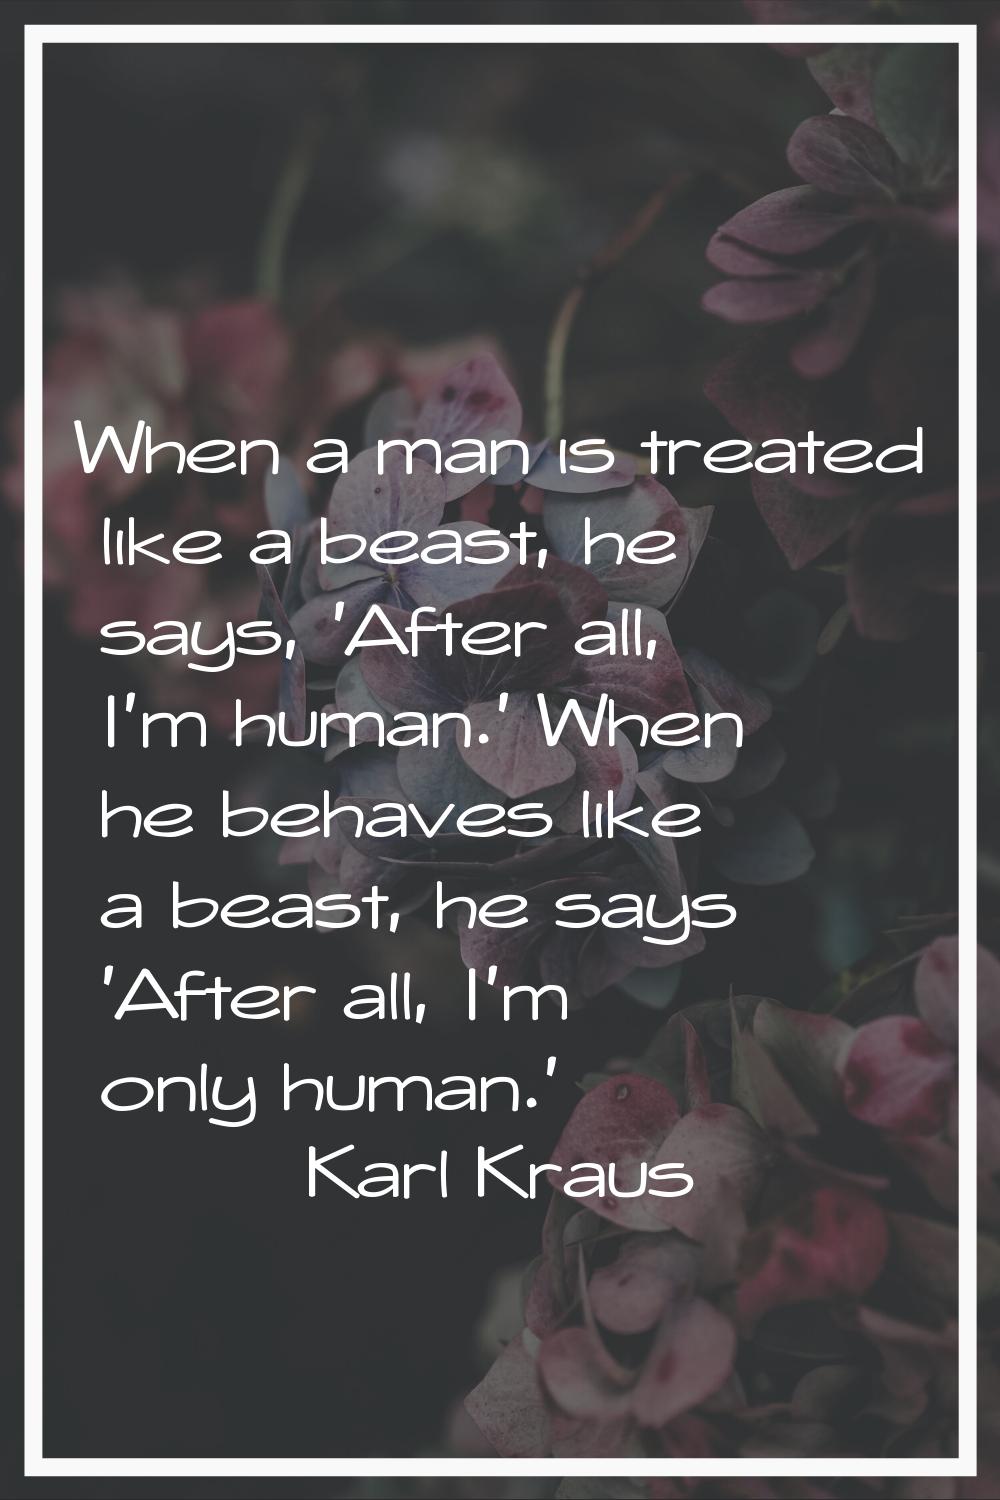 When a man is treated like a beast, he says, 'After all, I'm human.' When he behaves like a beast, 